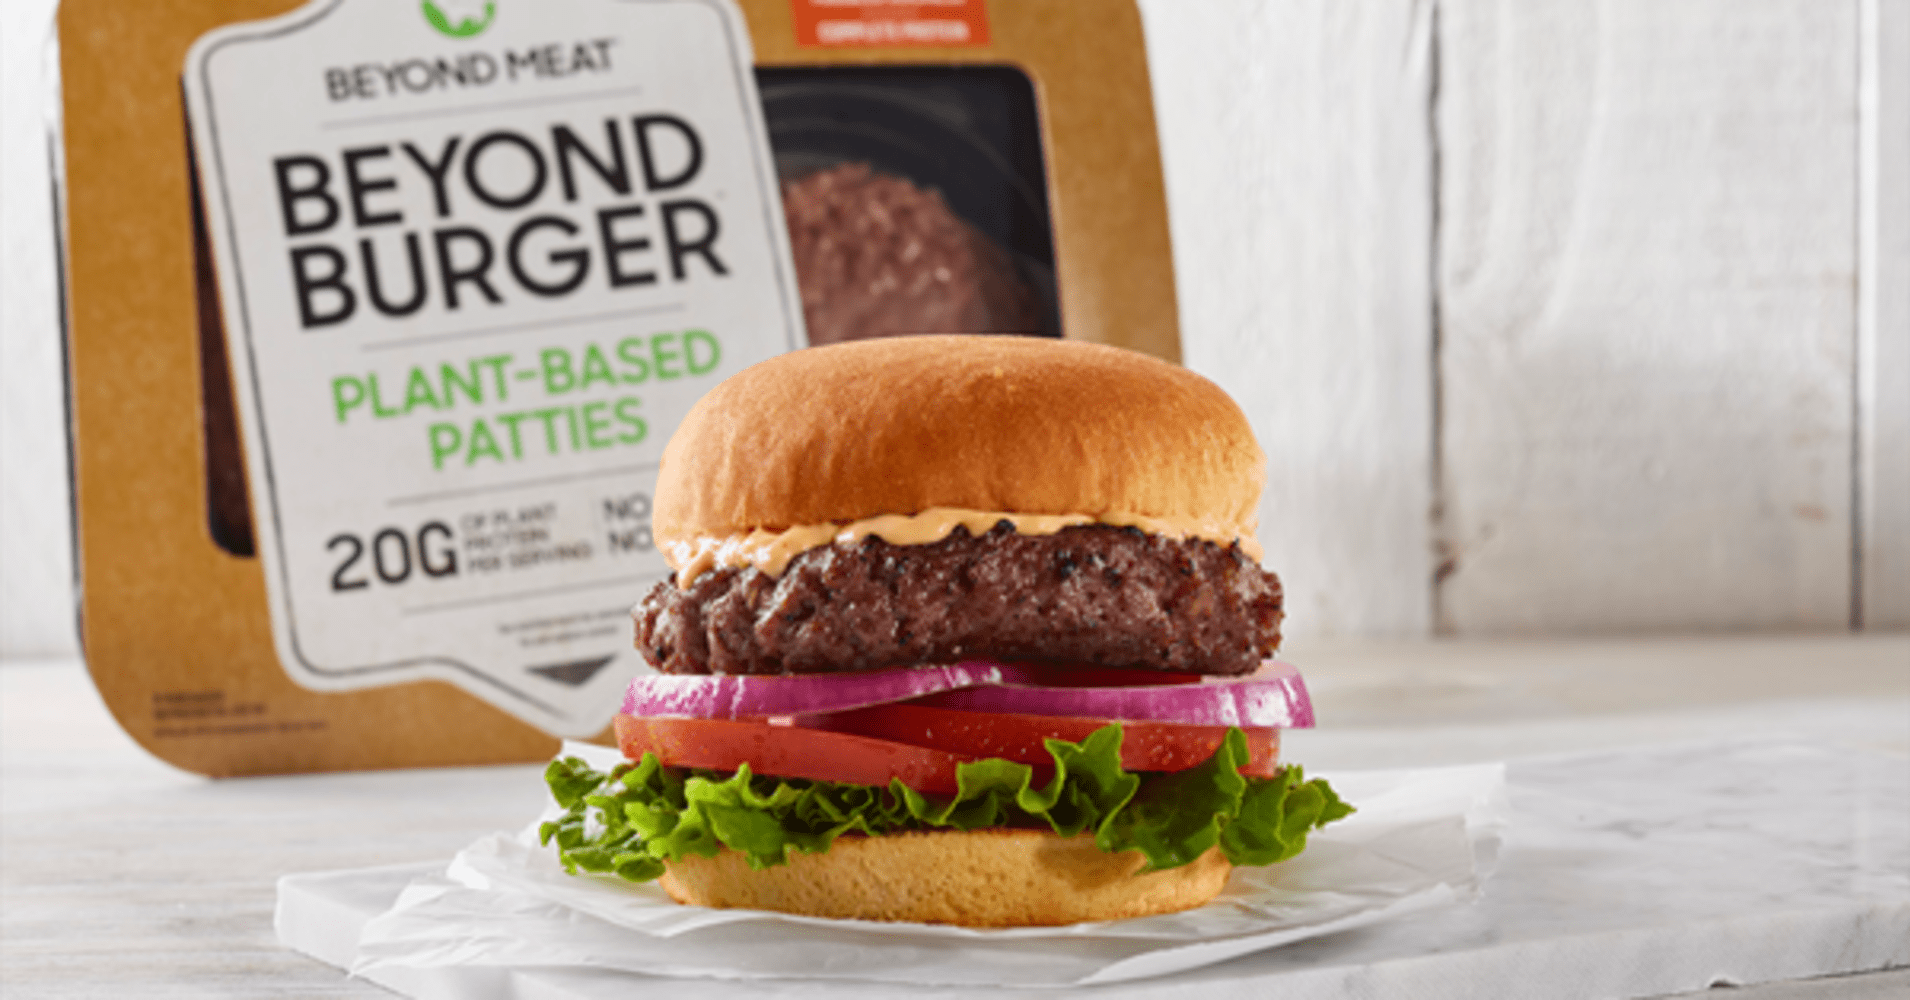 A burger that appears to use a meat patty but is actually a plant-based patty called Beyond Meat